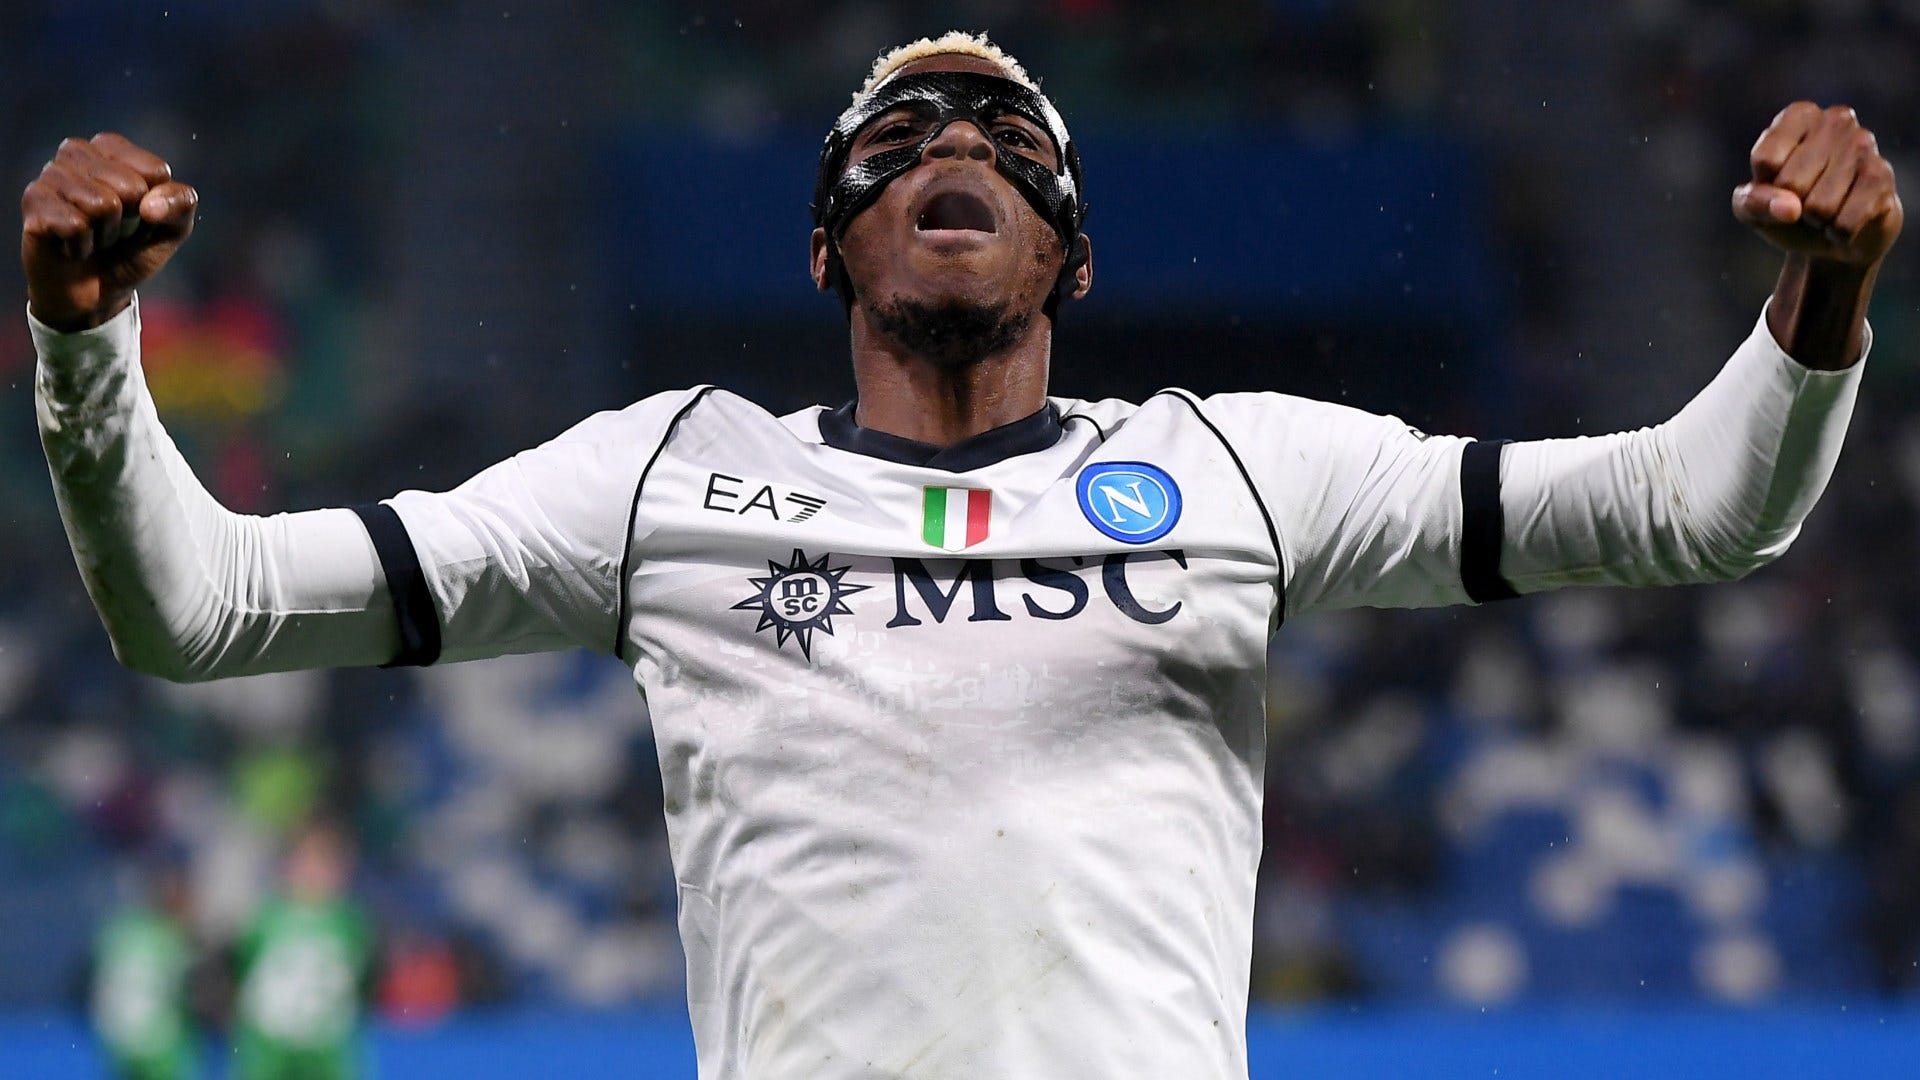 boost for chelsea? psg move away from rafael leao as a priority target to replace real madrid-bound kylian mbappe